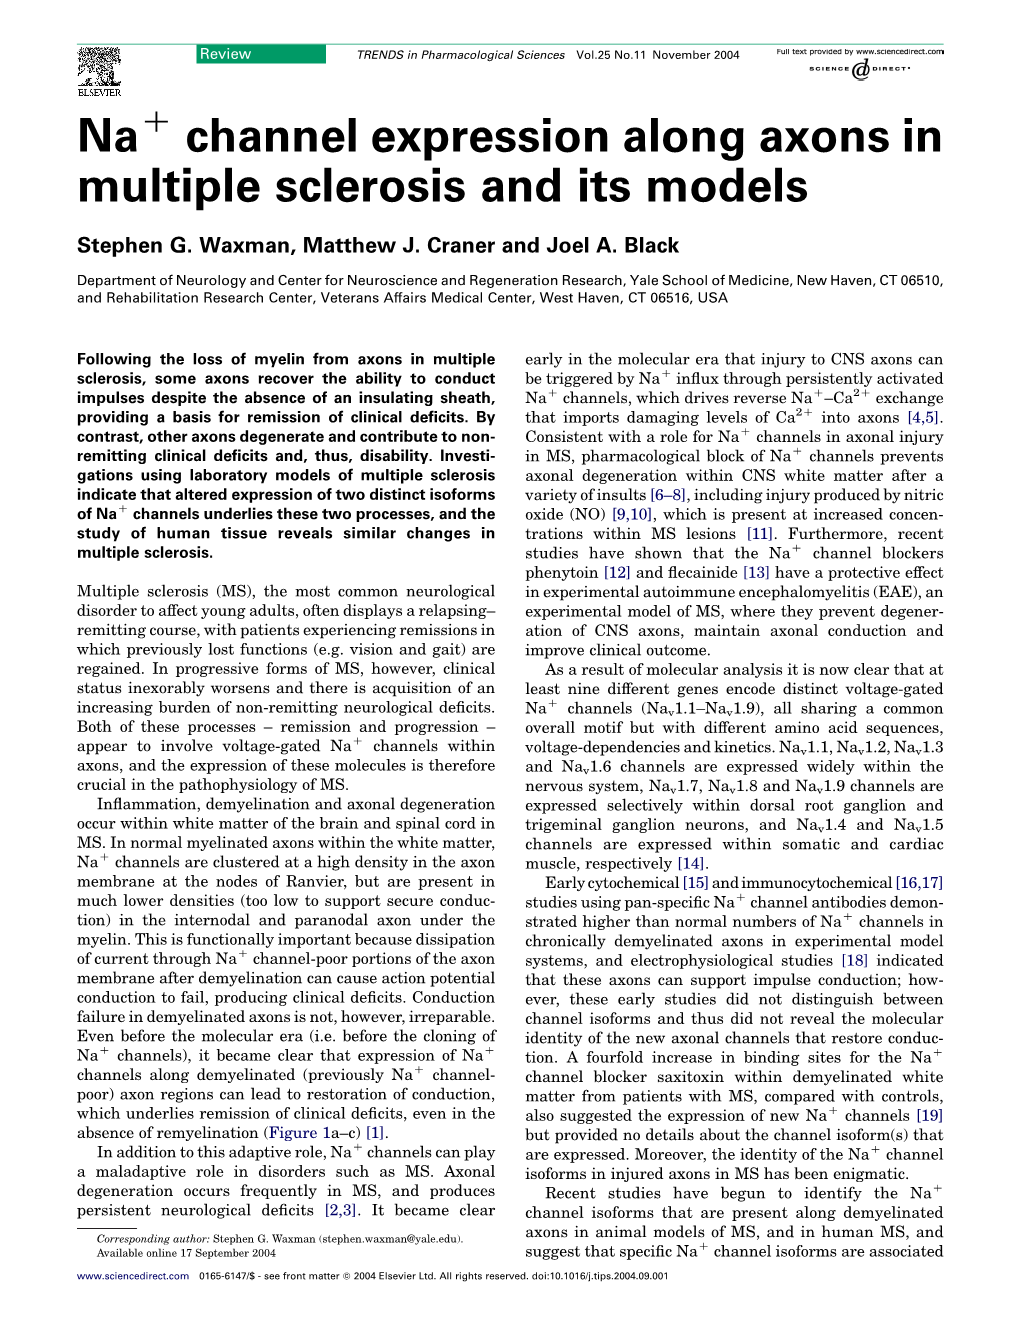 Nac Channel Expression Along Axons in Multiple Sclerosis and Its Models